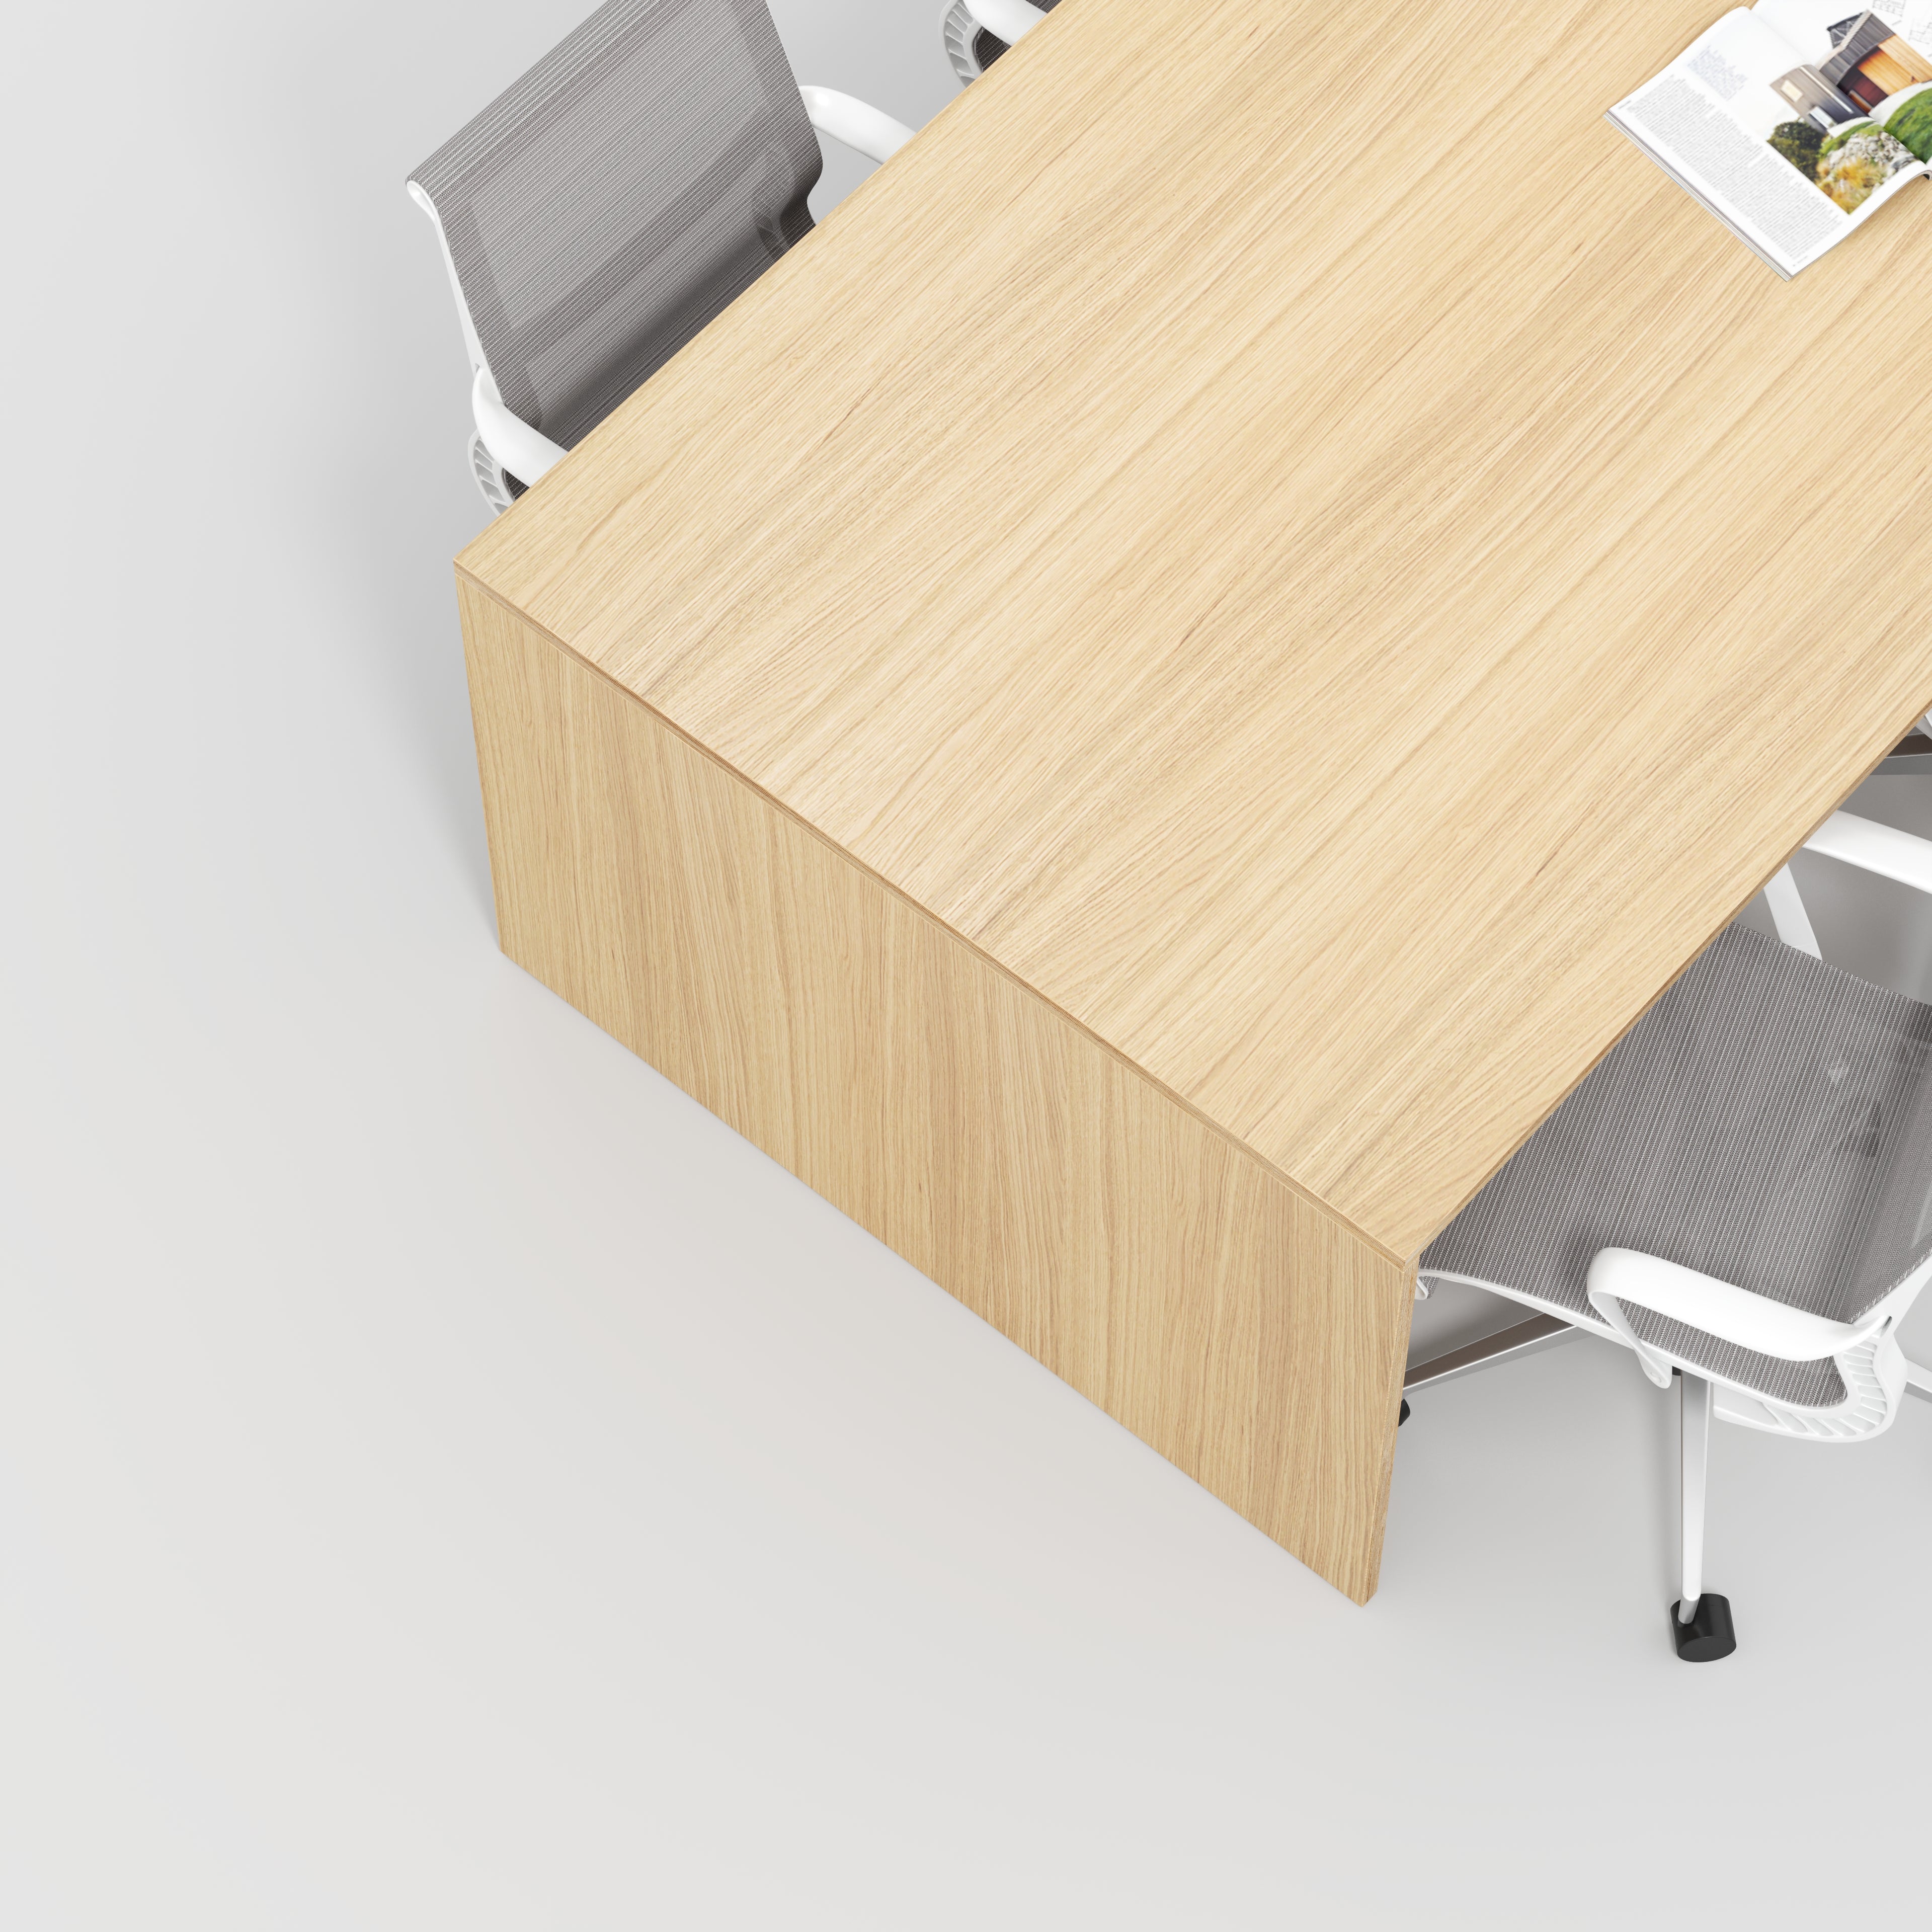 Table with Solid Sides - Plywood Oak - 2400(w) x 1200(d) x 750(h)